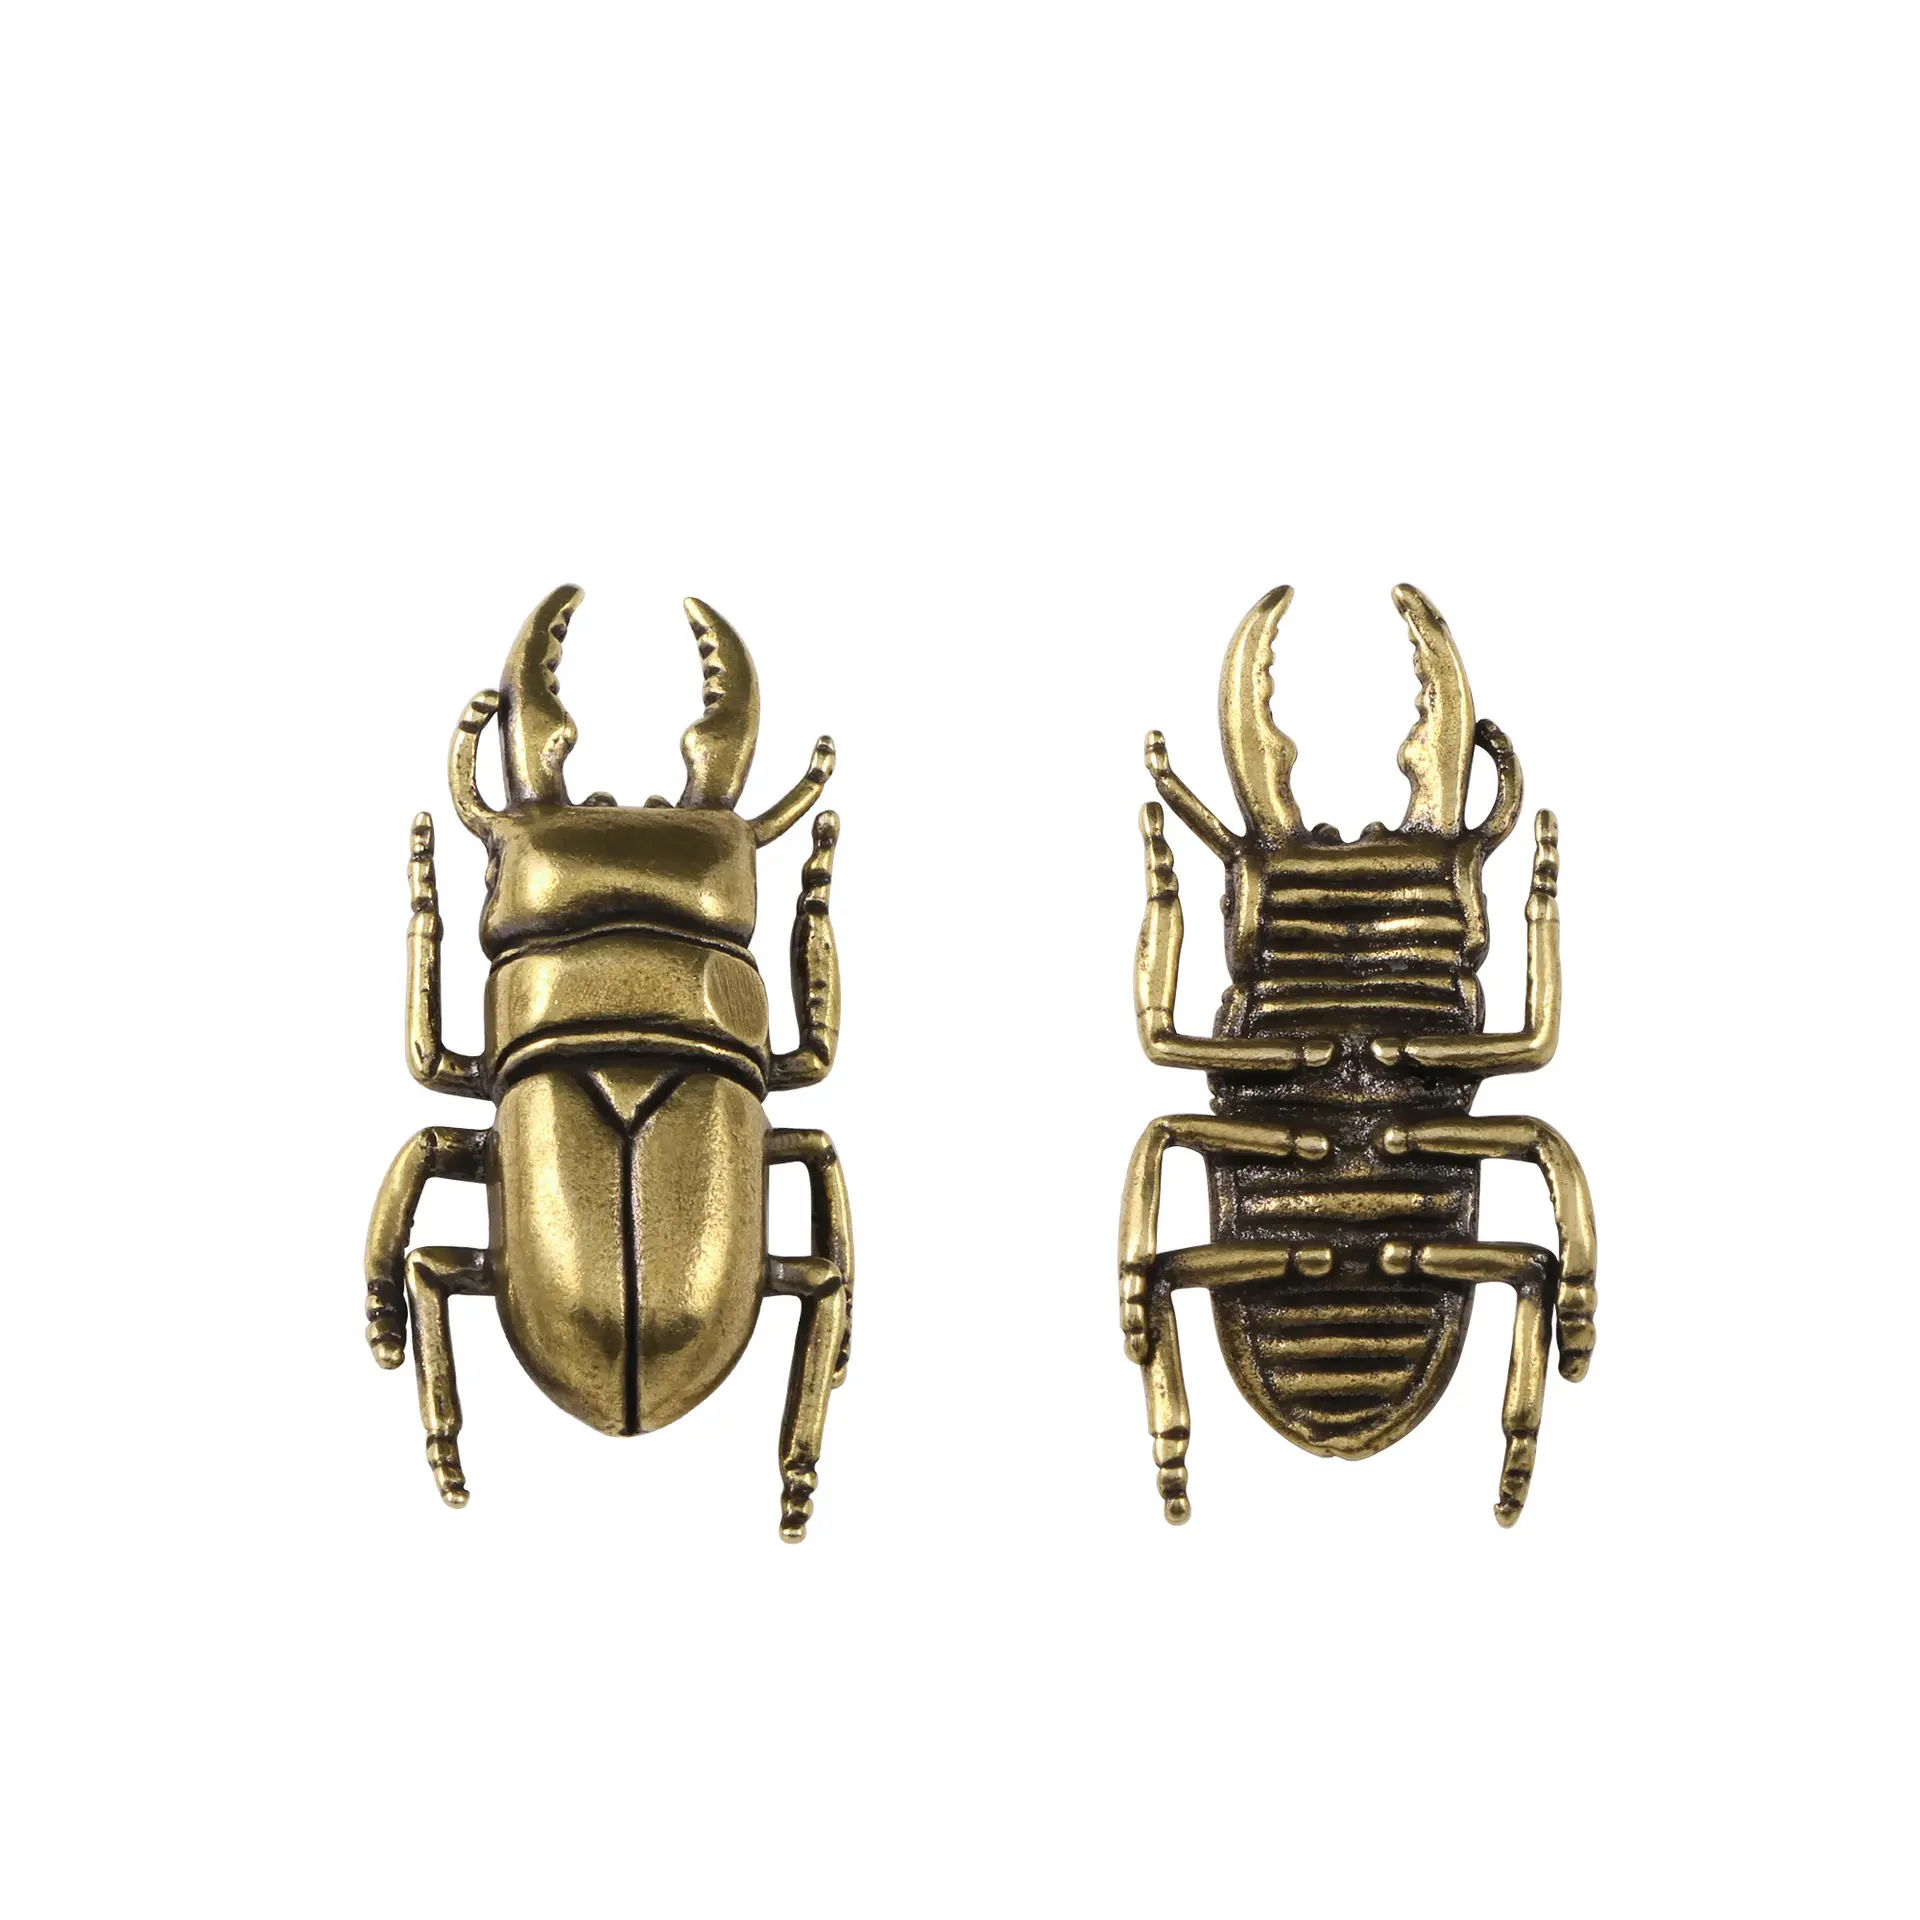 Solid brass beetle antique ornaments creative insect desktop decoration gift copper crafts.